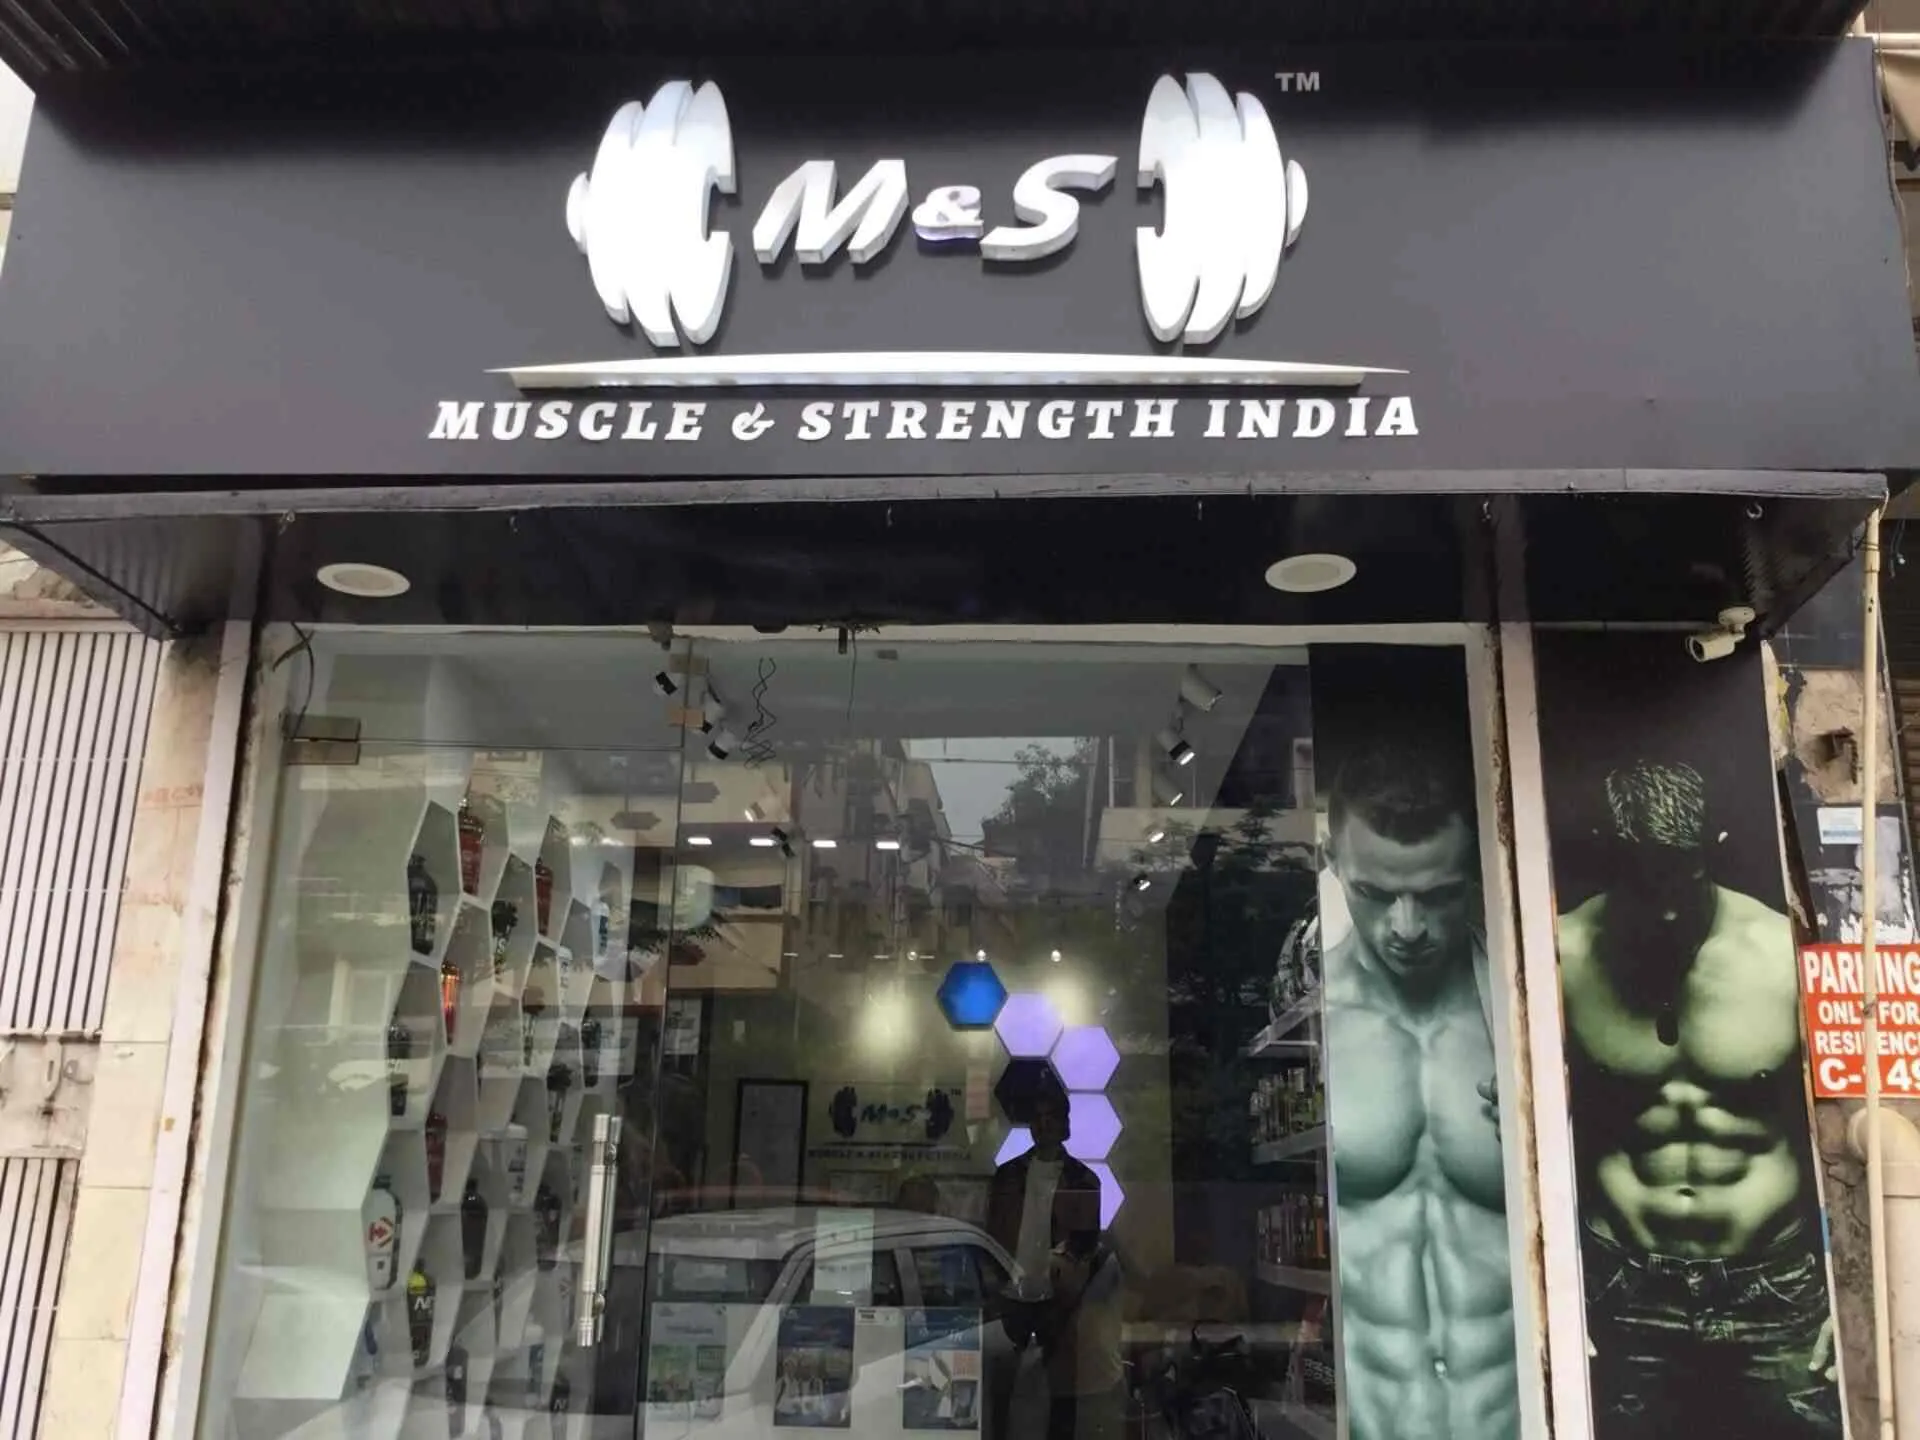 Muscle & Strength India in India, central_asia | Natural Beauty Products - Country Helper